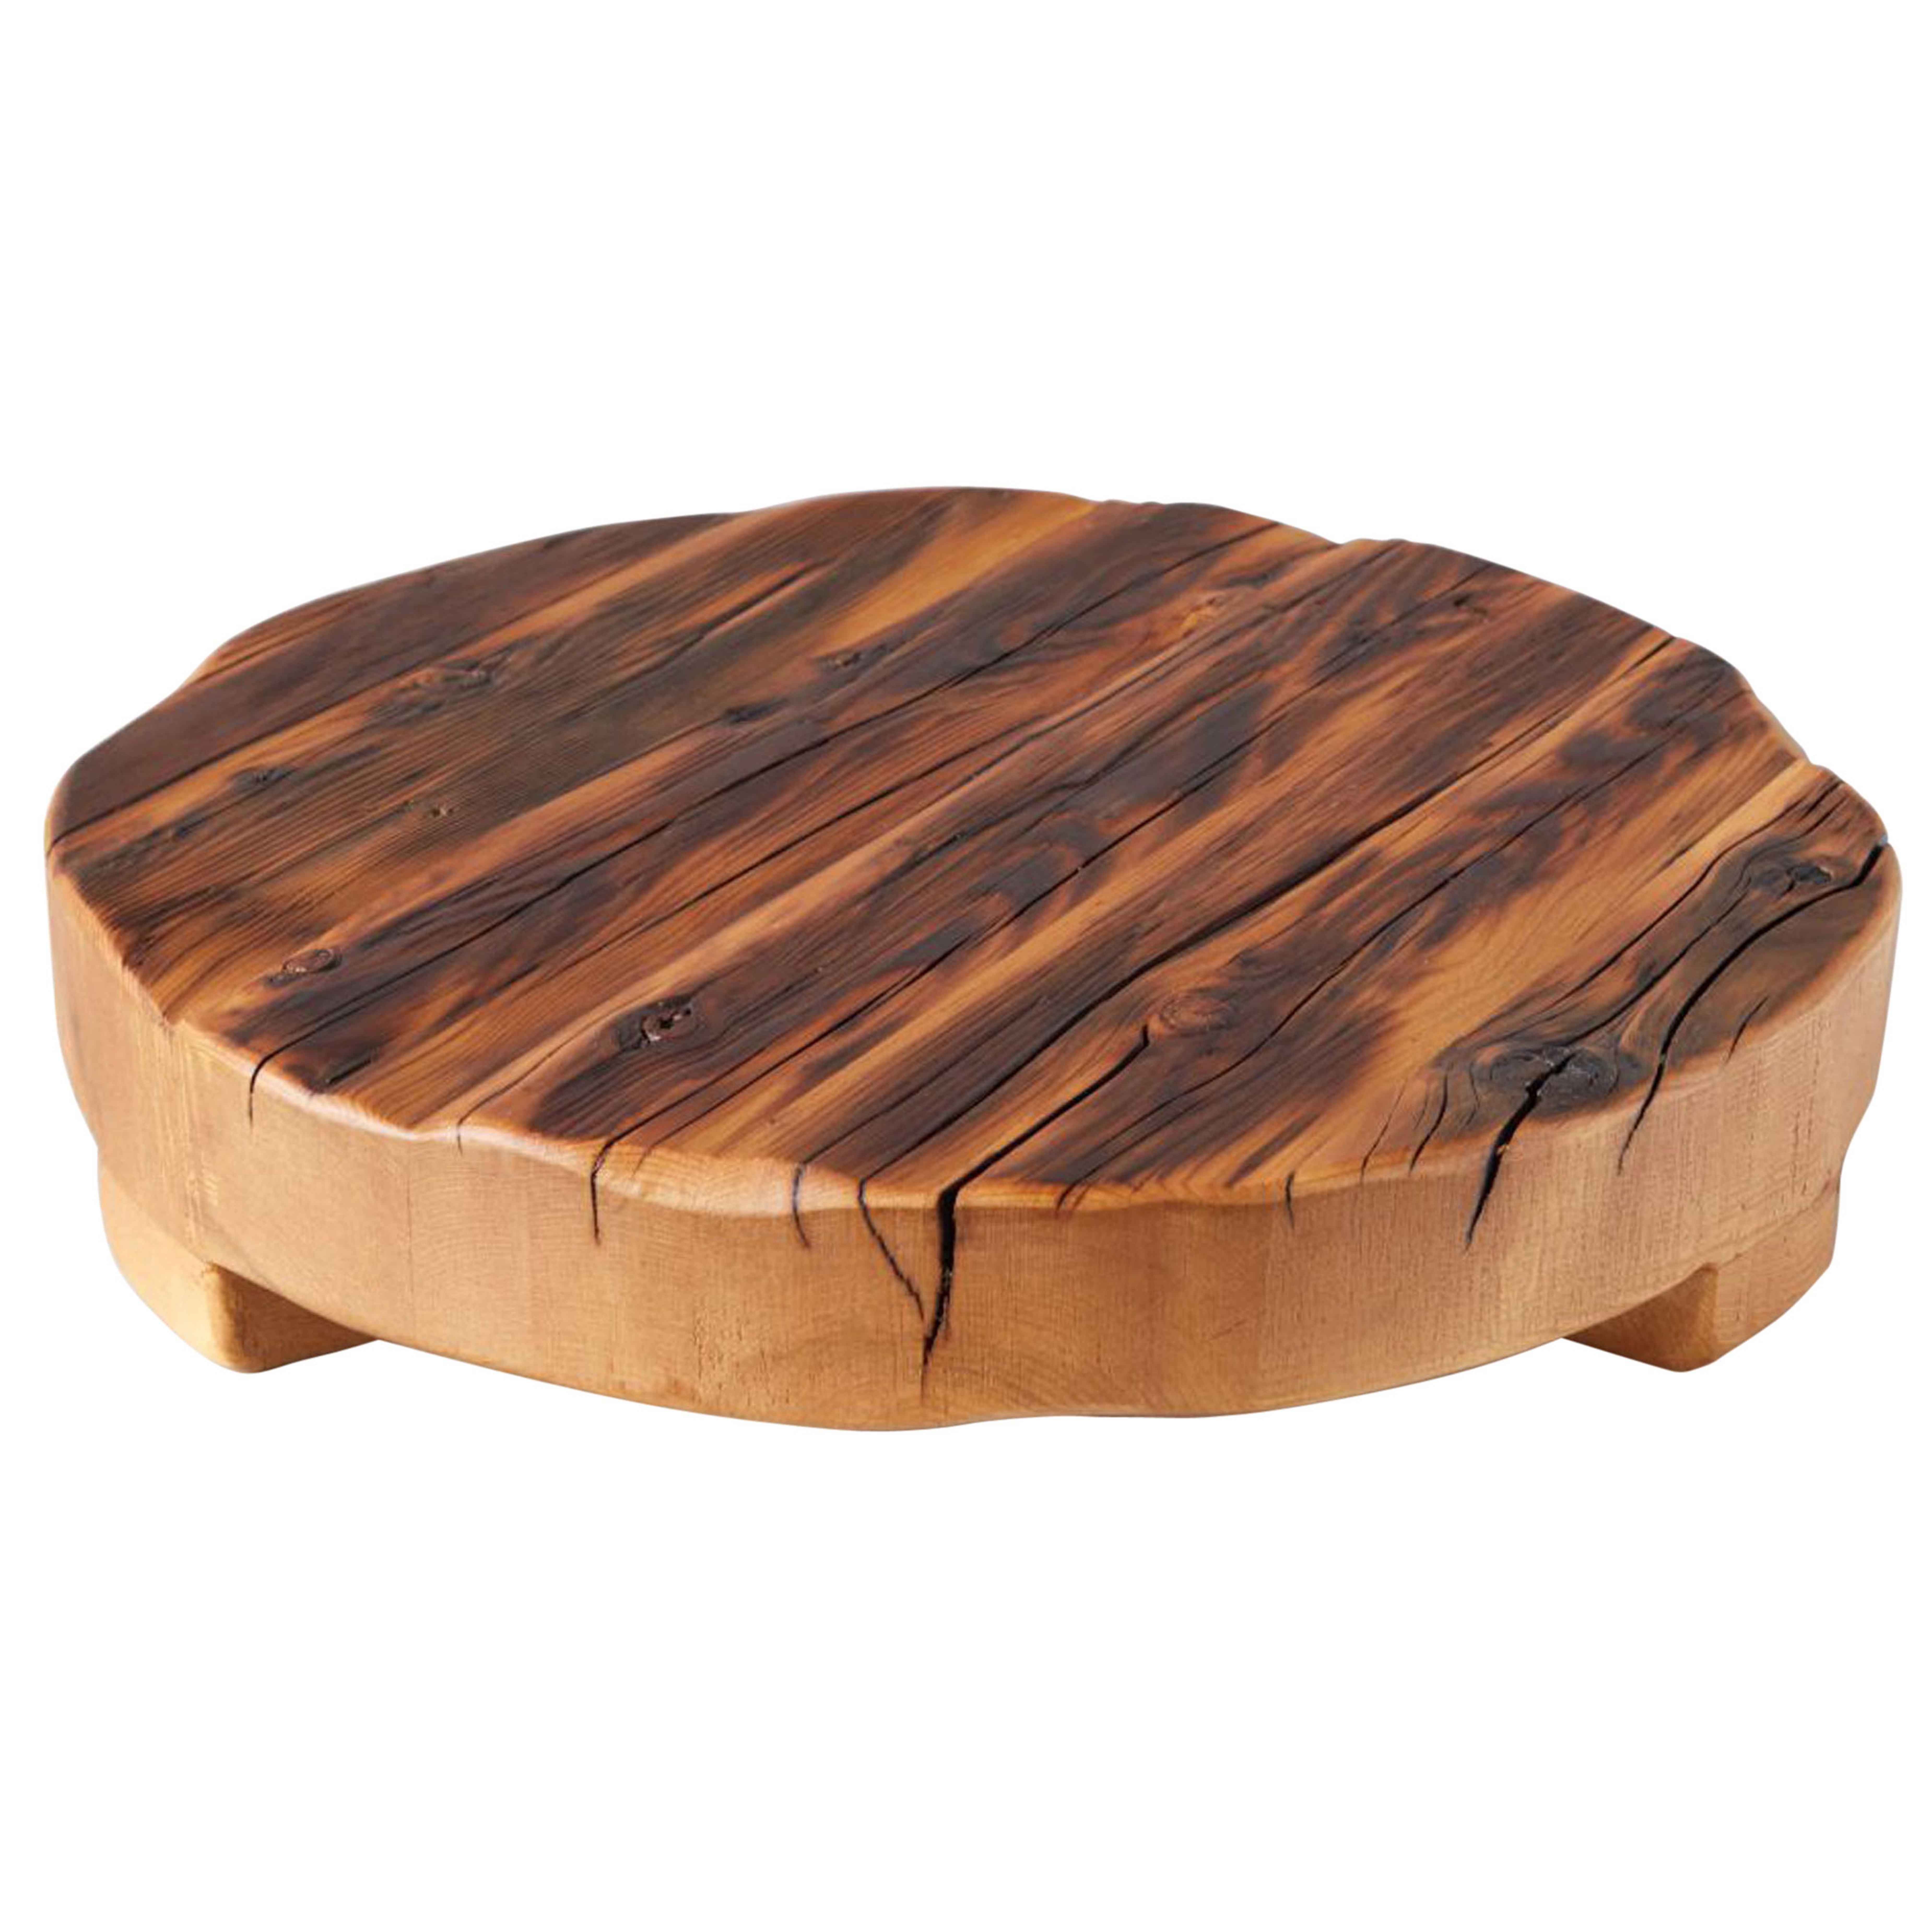 Alice Modern Classic Brown Reclaimed Wood Round Serving Tray - Large - Kathy Kuo Home